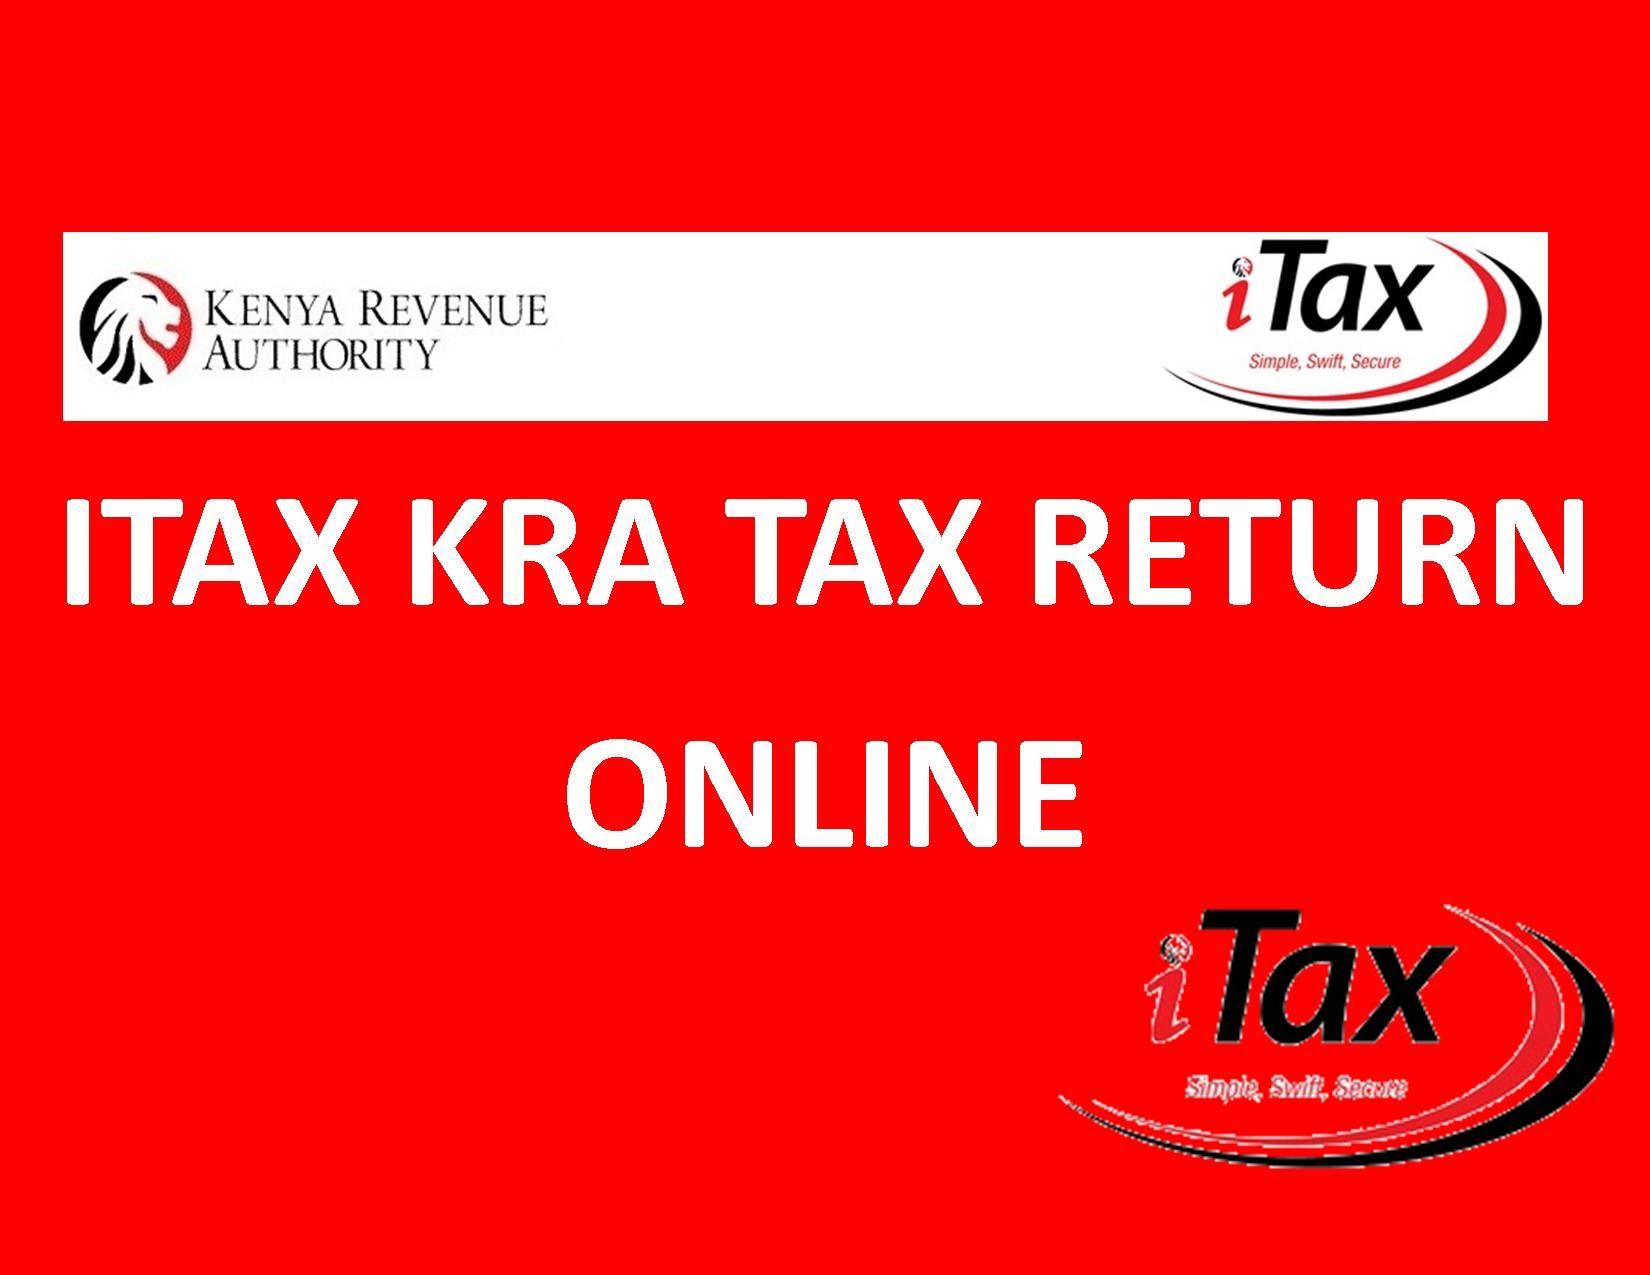 How to file returns on iTax in 10 easy steps